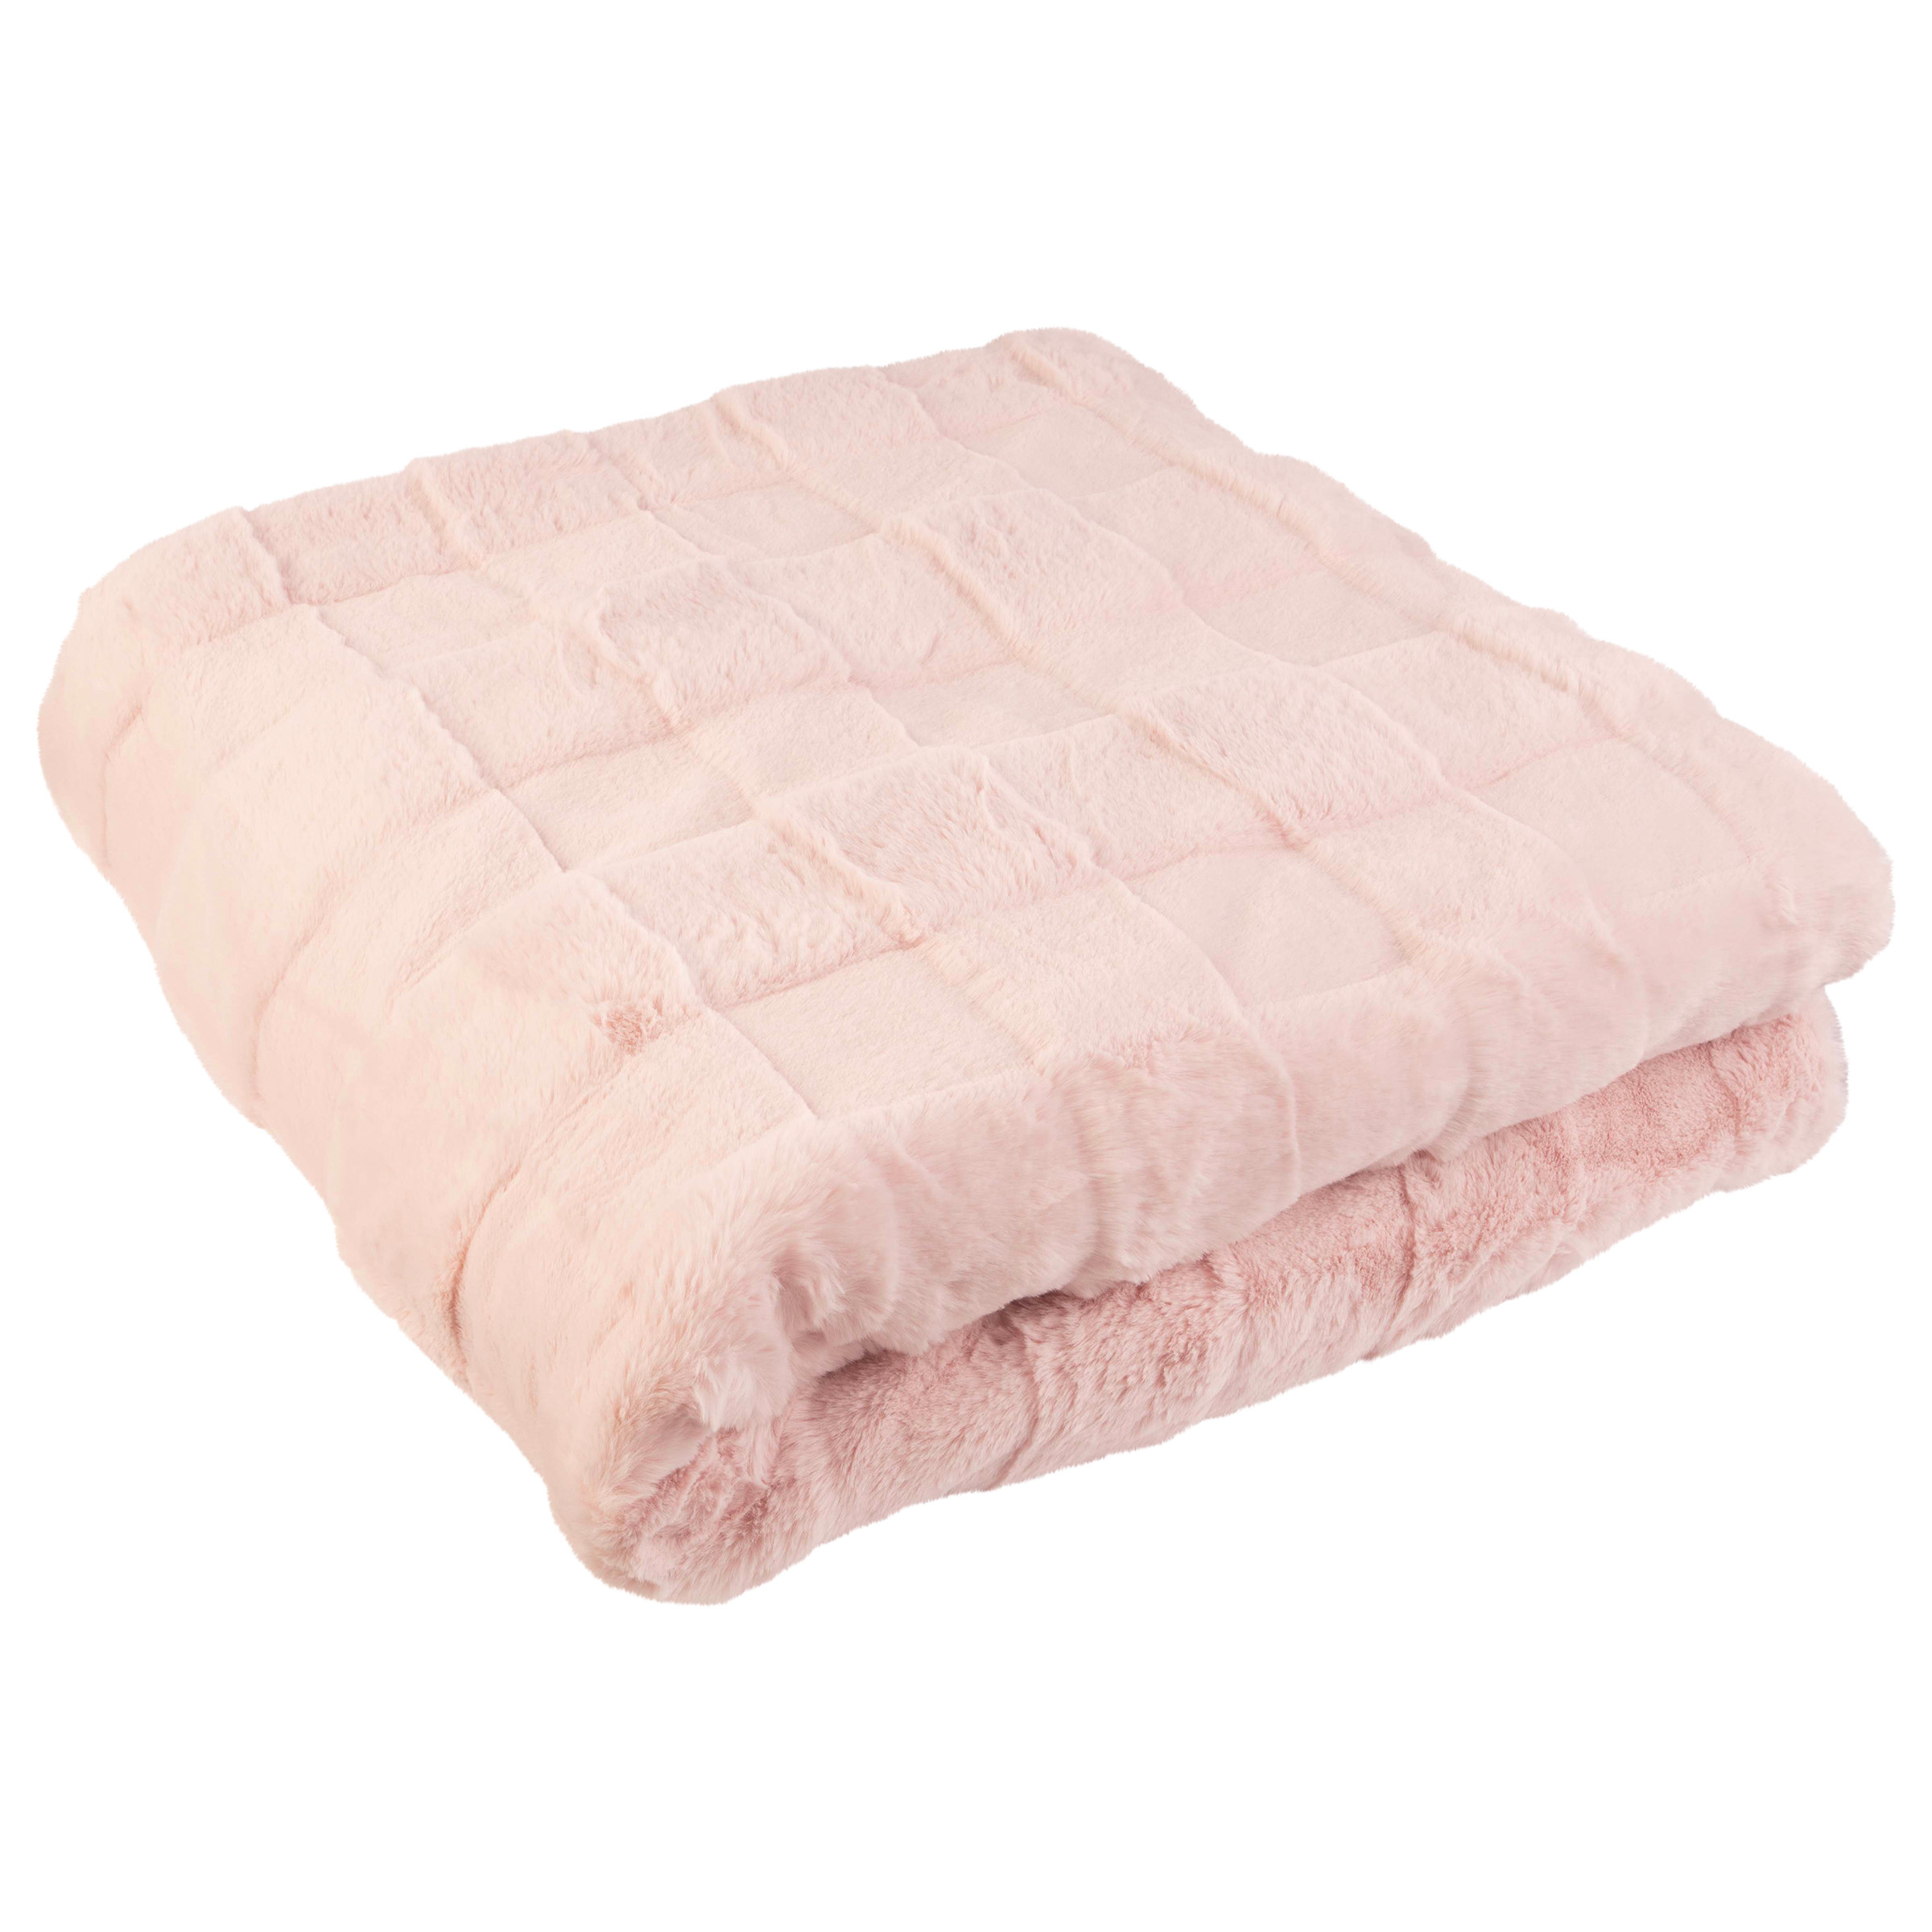 Faux Fur Blanket - 60x80-Inch Queen Size Throw Blanket With Plush Faux Fur Front And Mink Fur Back - Bedding For Sofas And Beds - Pink